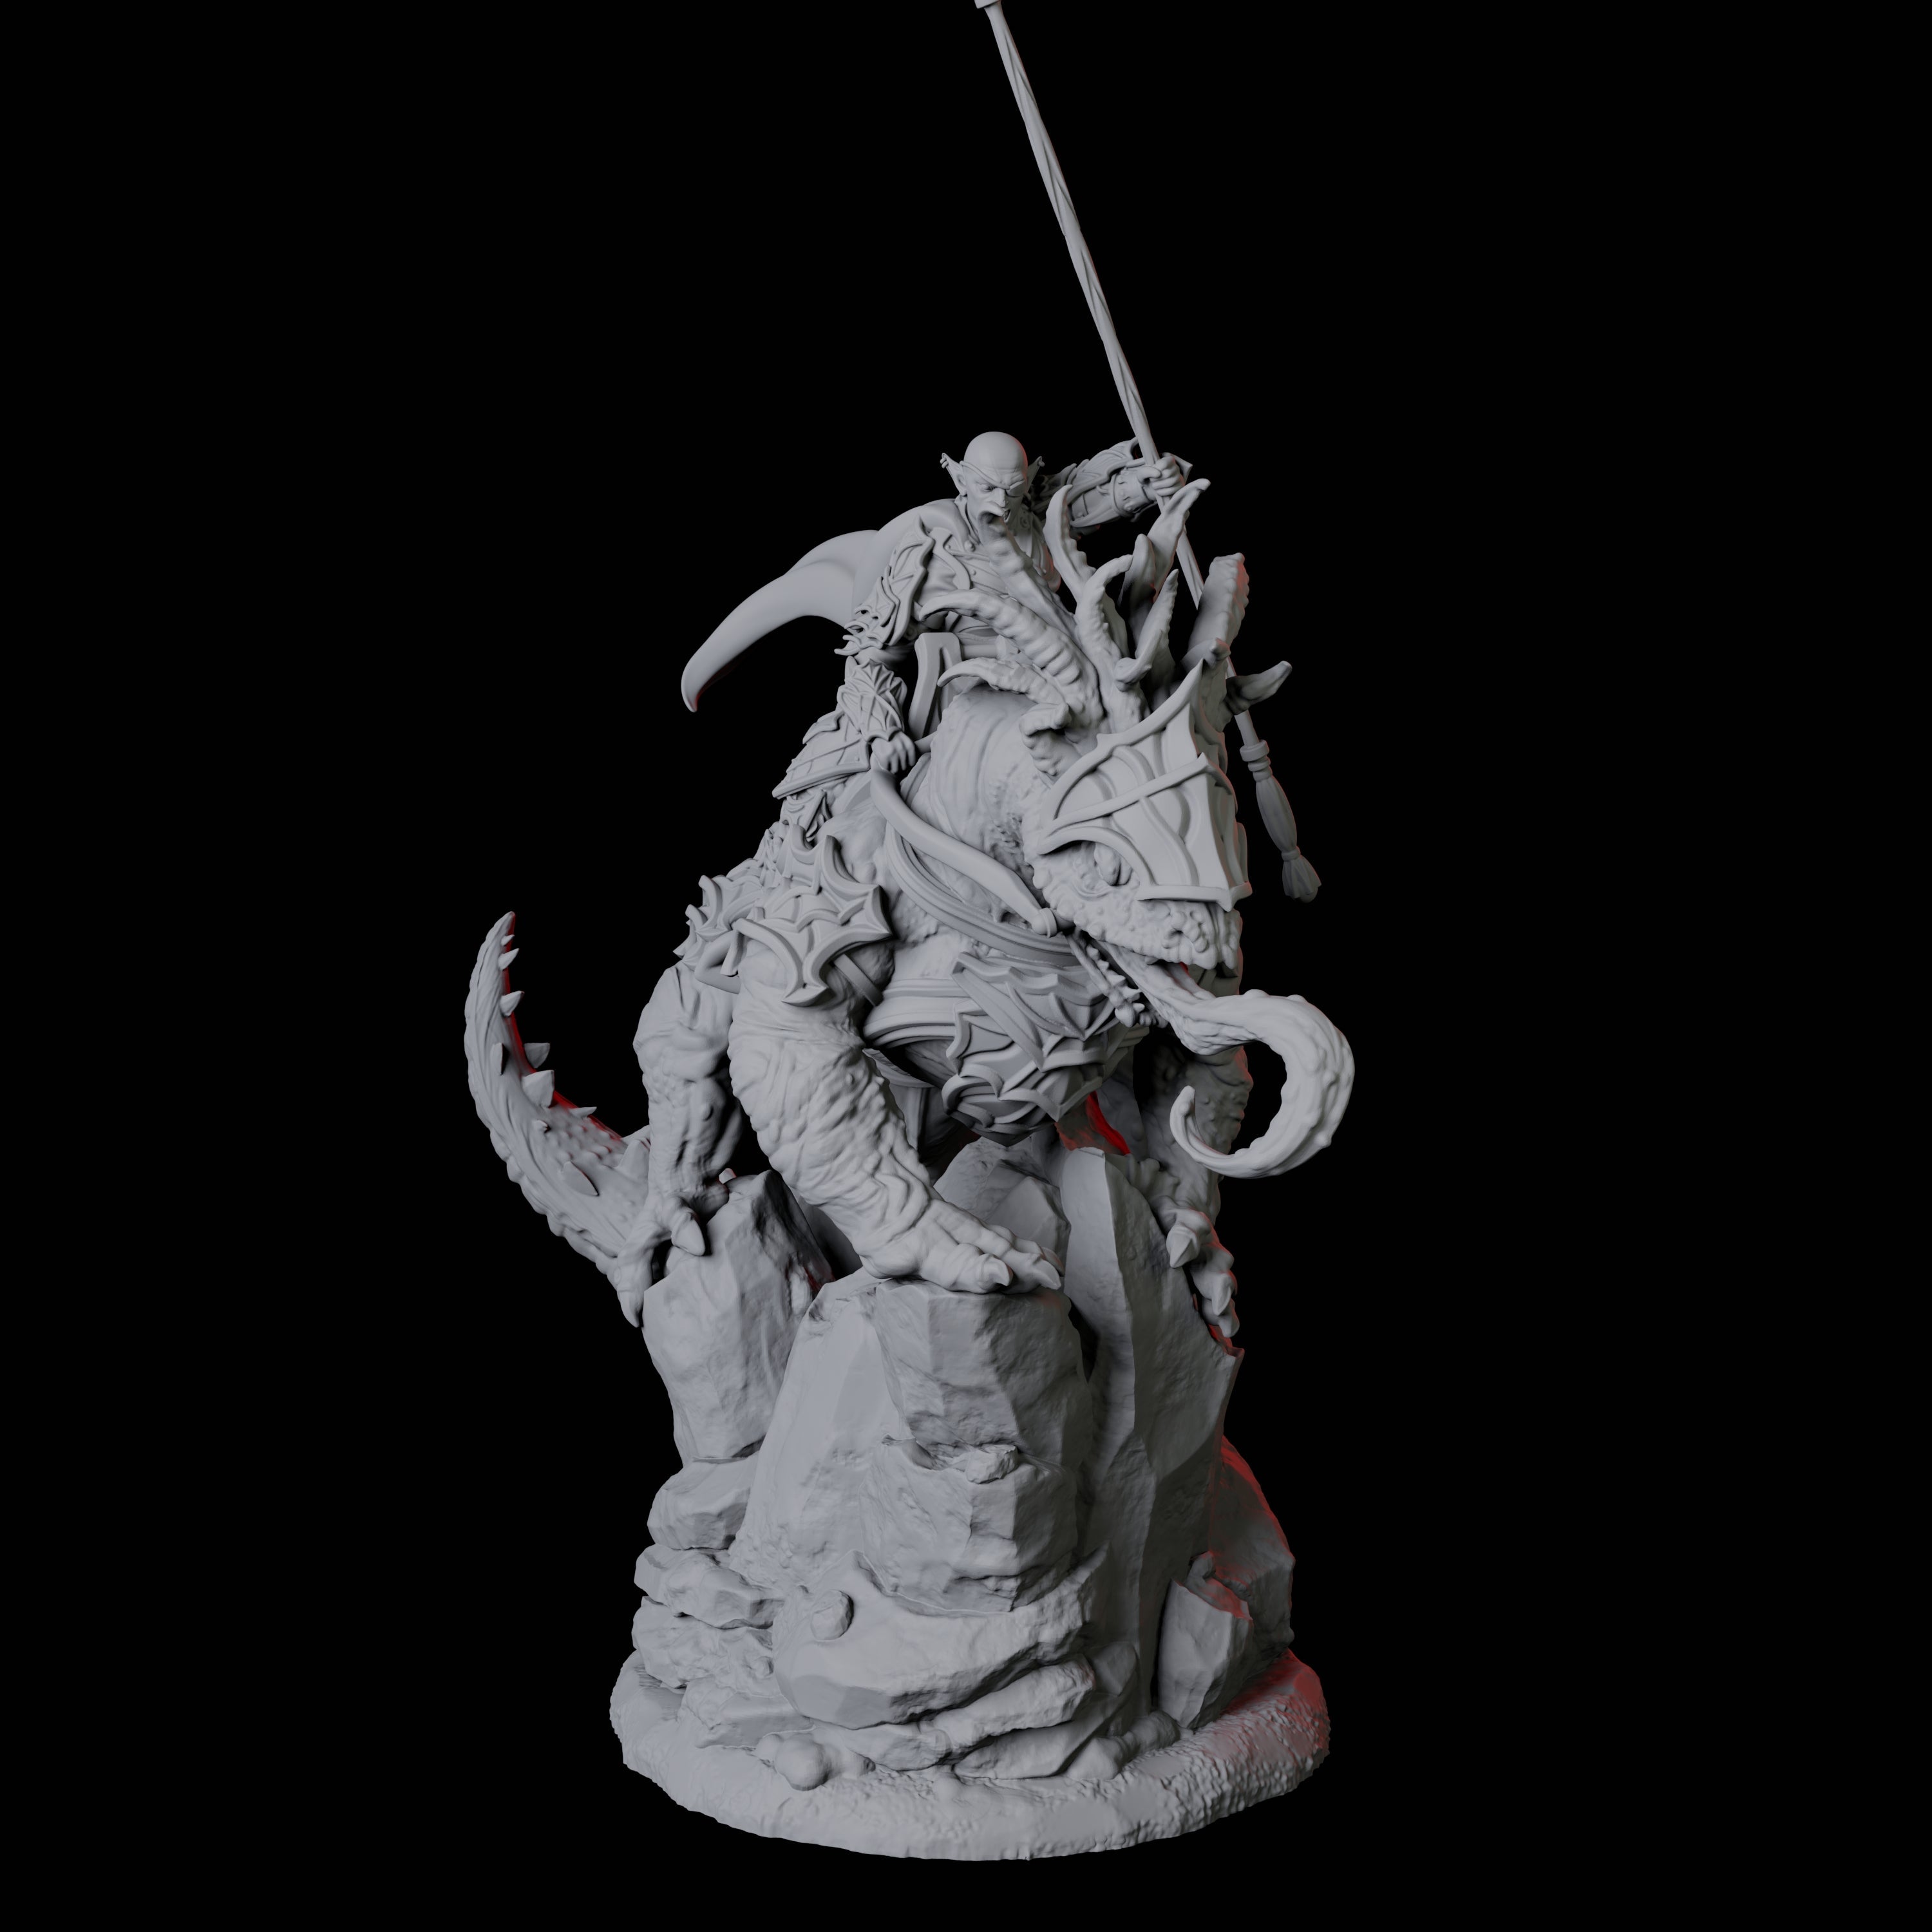 Fighter mounted on Giant Lizard B Miniature for Dungeons and Dragons, Pathfinder or other TTRPGs